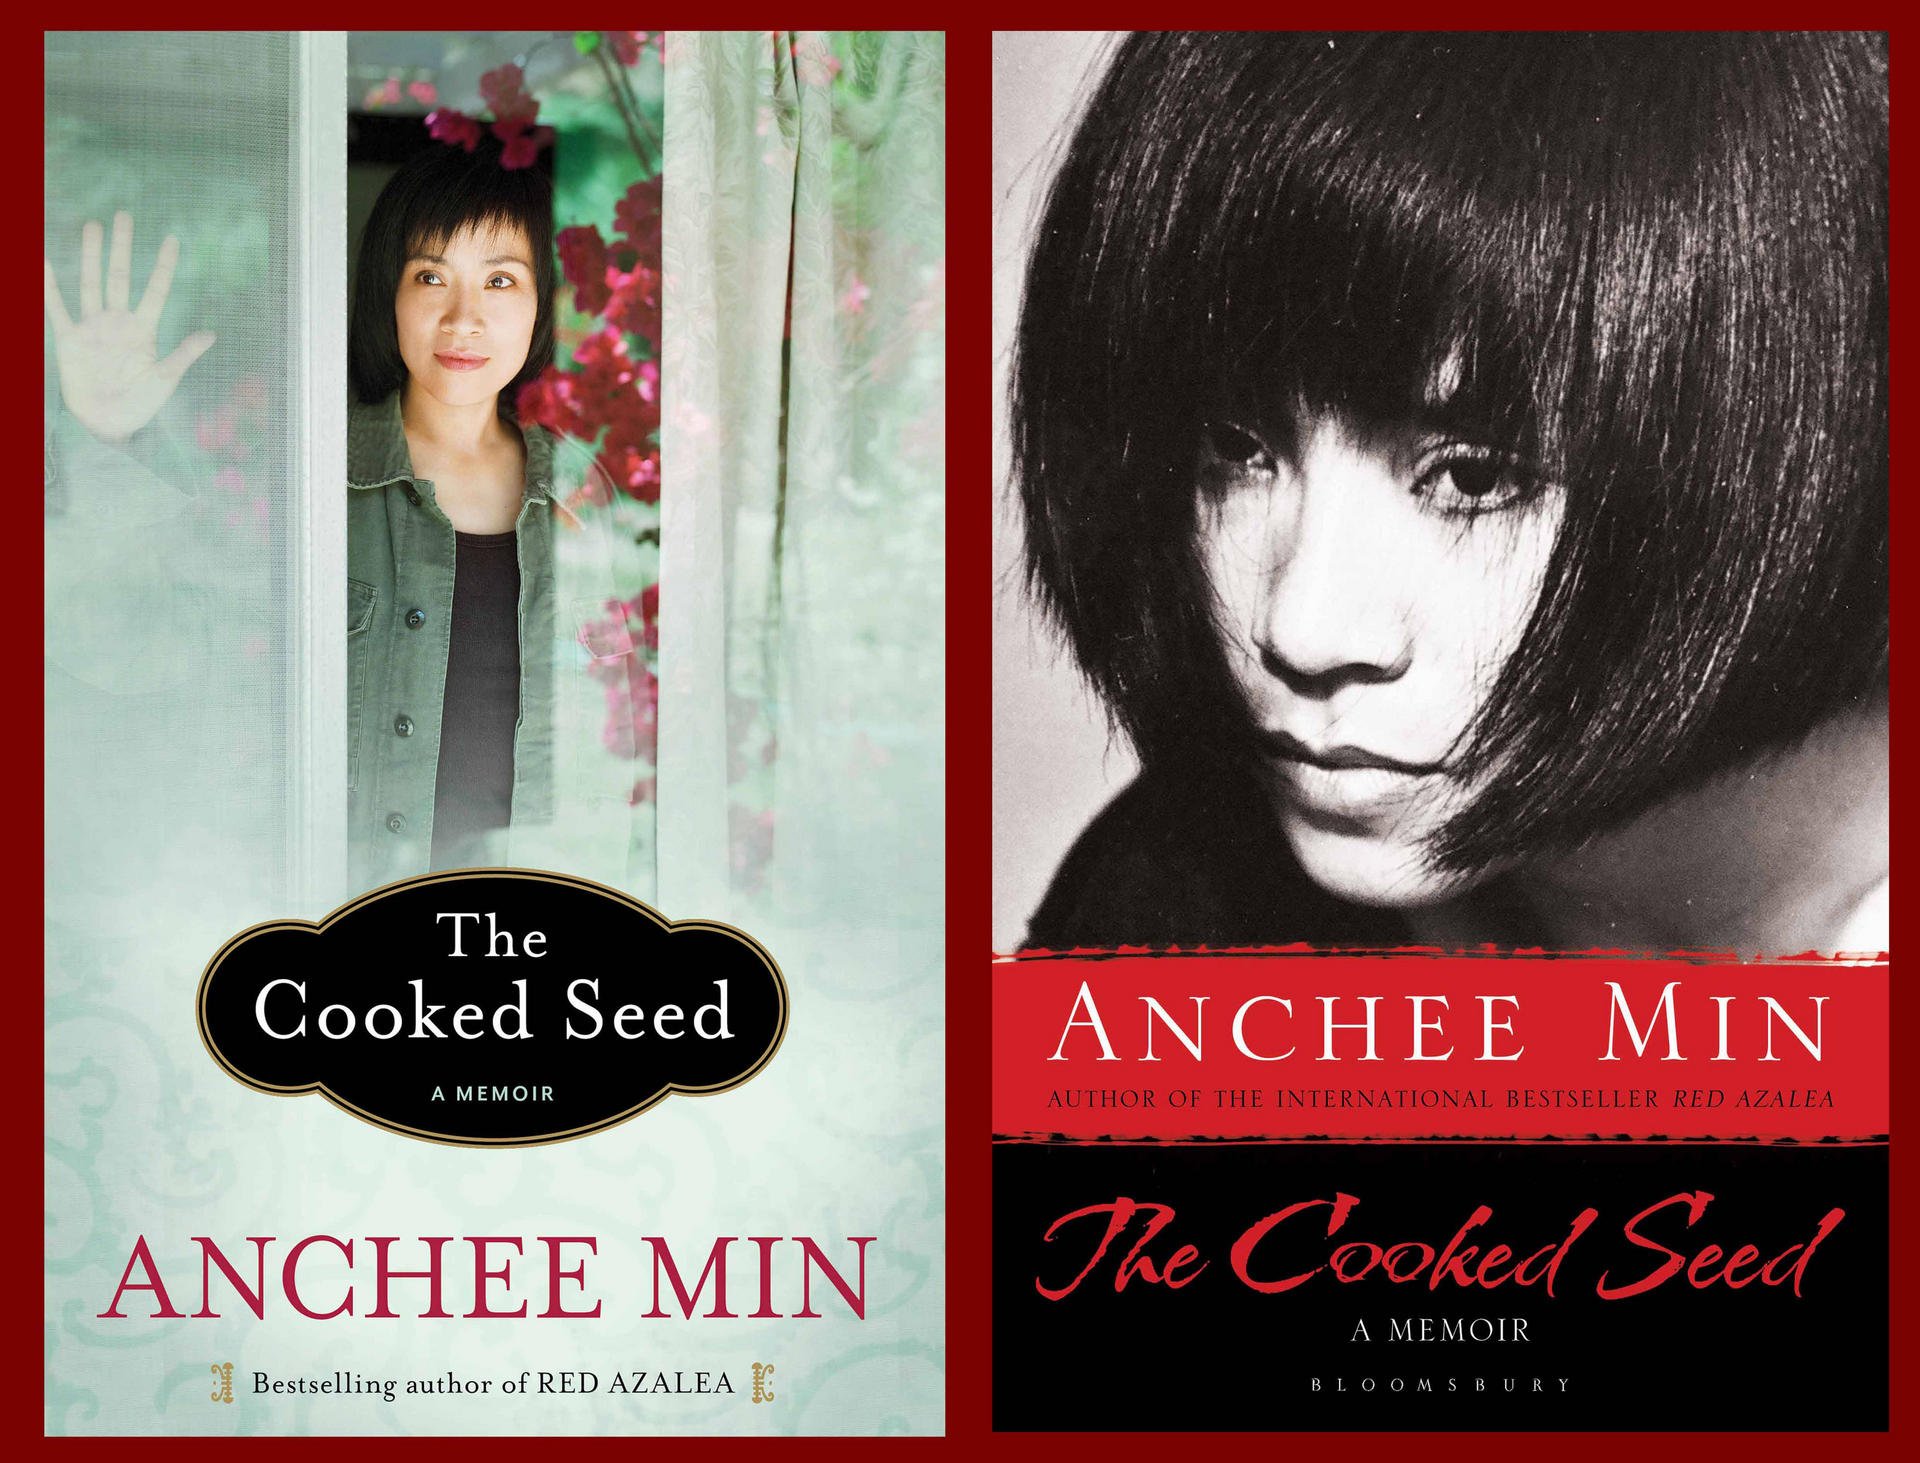 Anchee Min's 'The Cooked Seed'